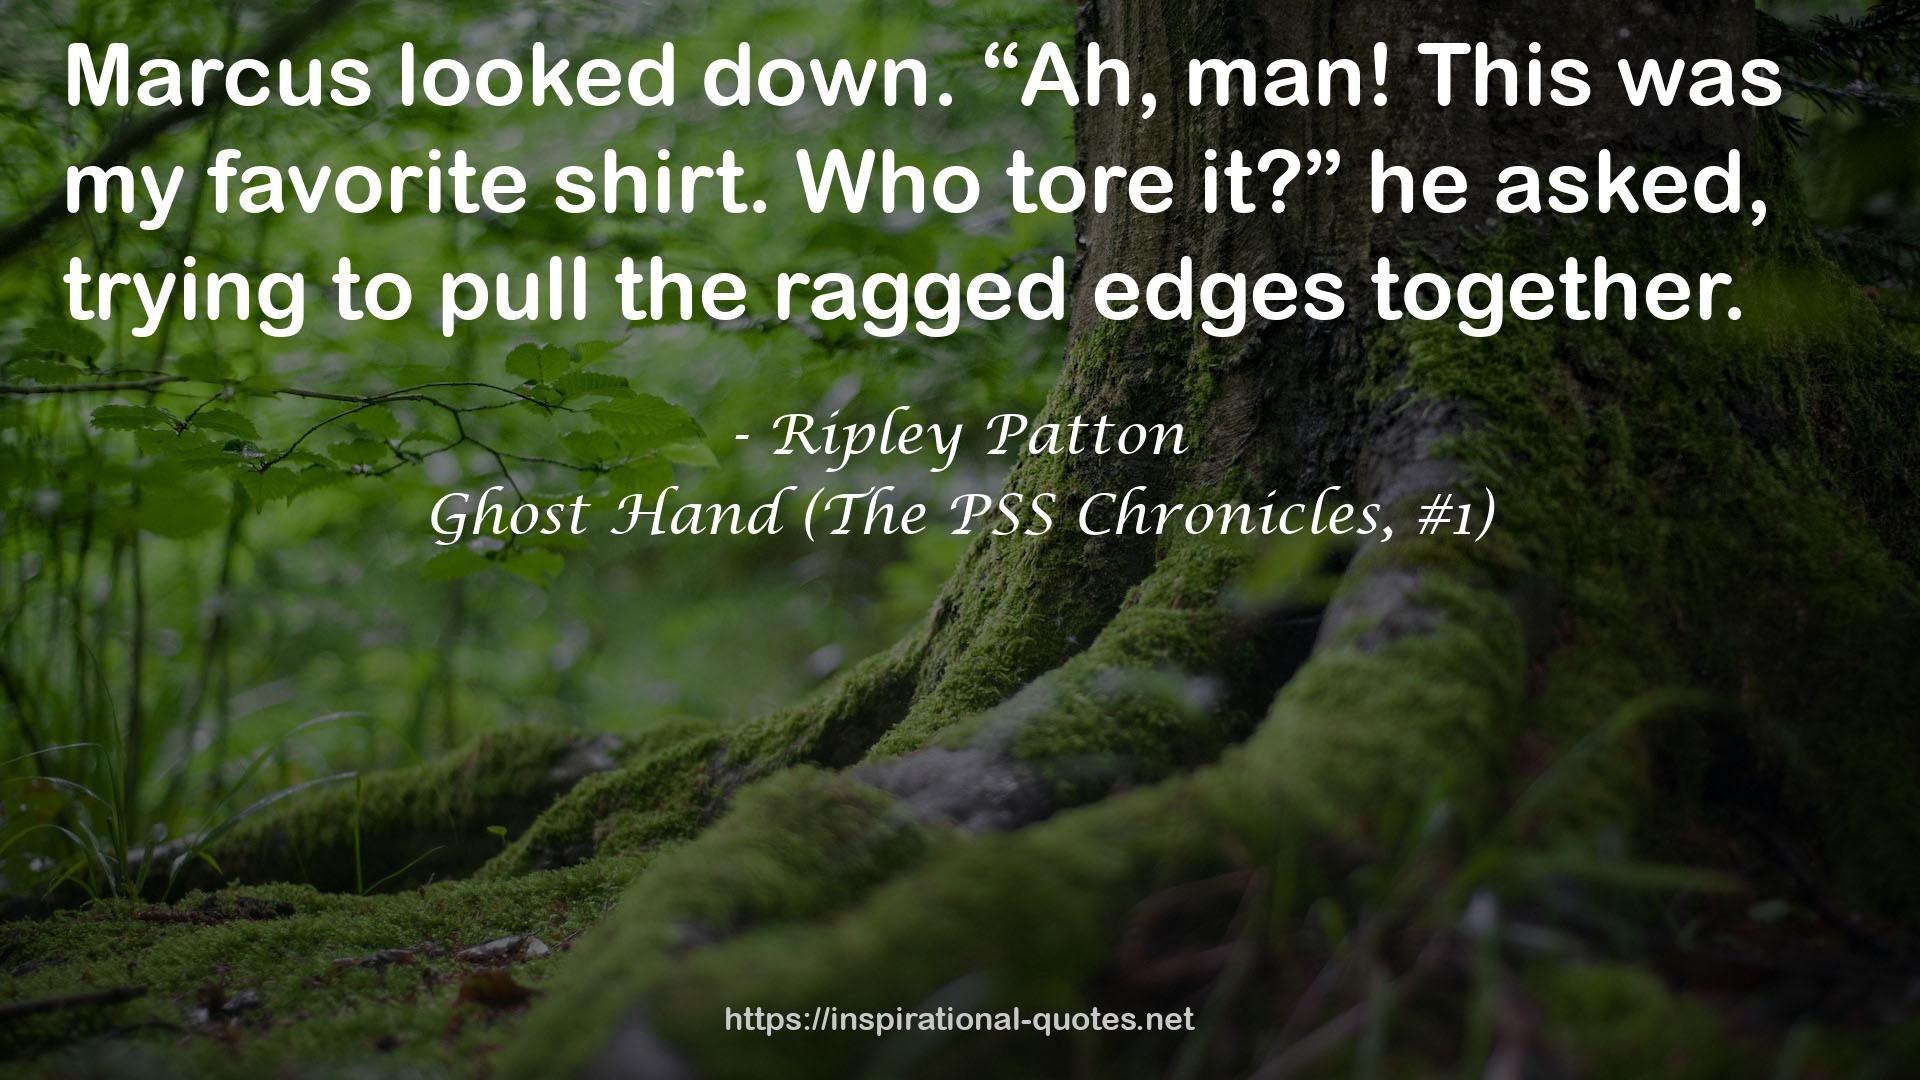 Ghost Hand (The PSS Chronicles, #1) QUOTES